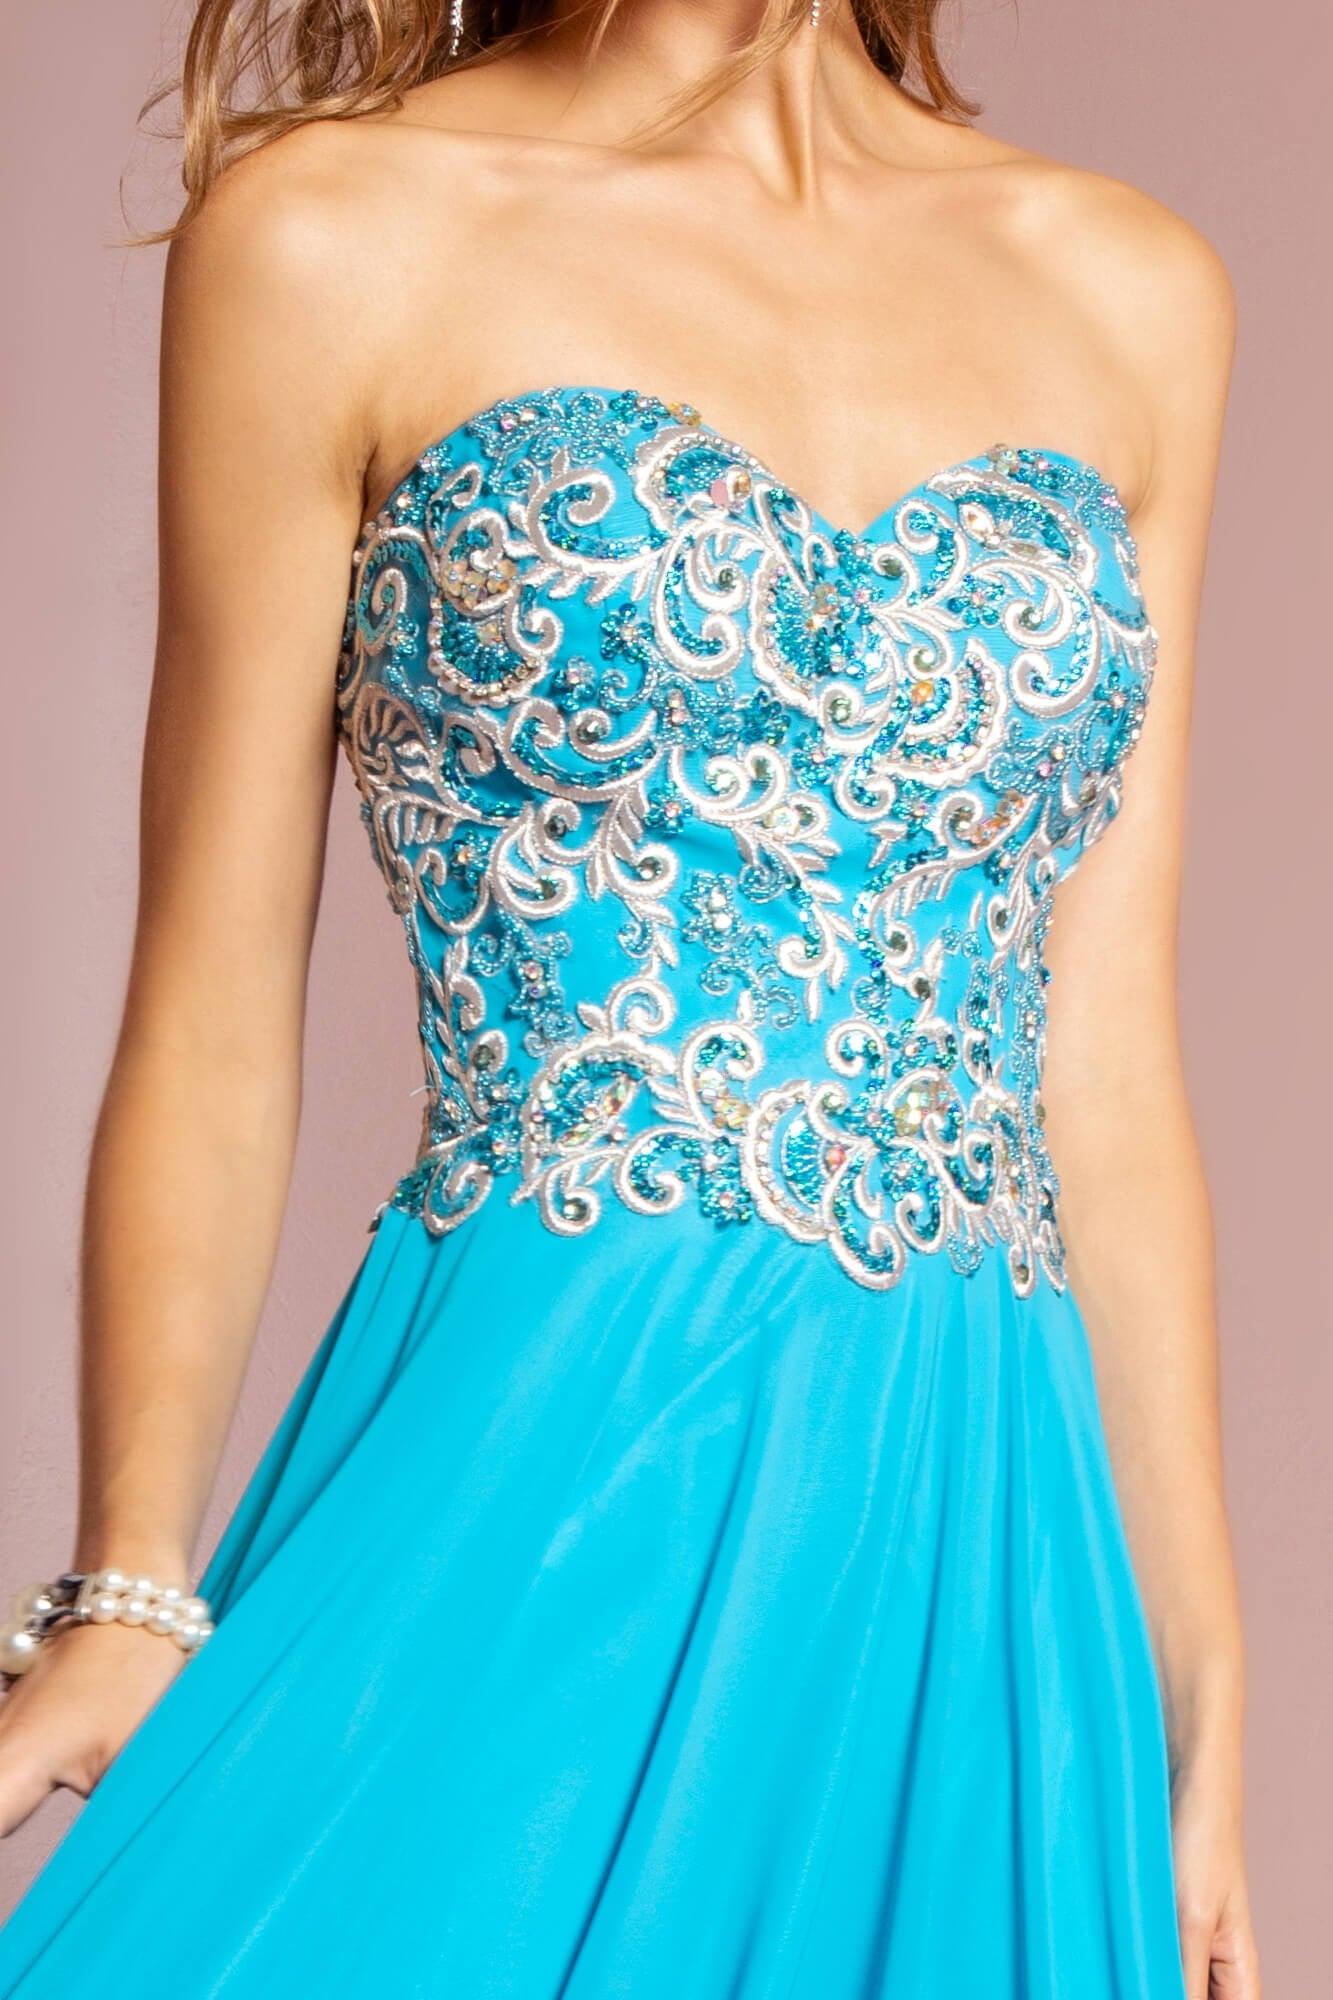 Prom Strapless Sweetheart Chiffon Evening Long Gown - The Dress Outlet Elizabeth K